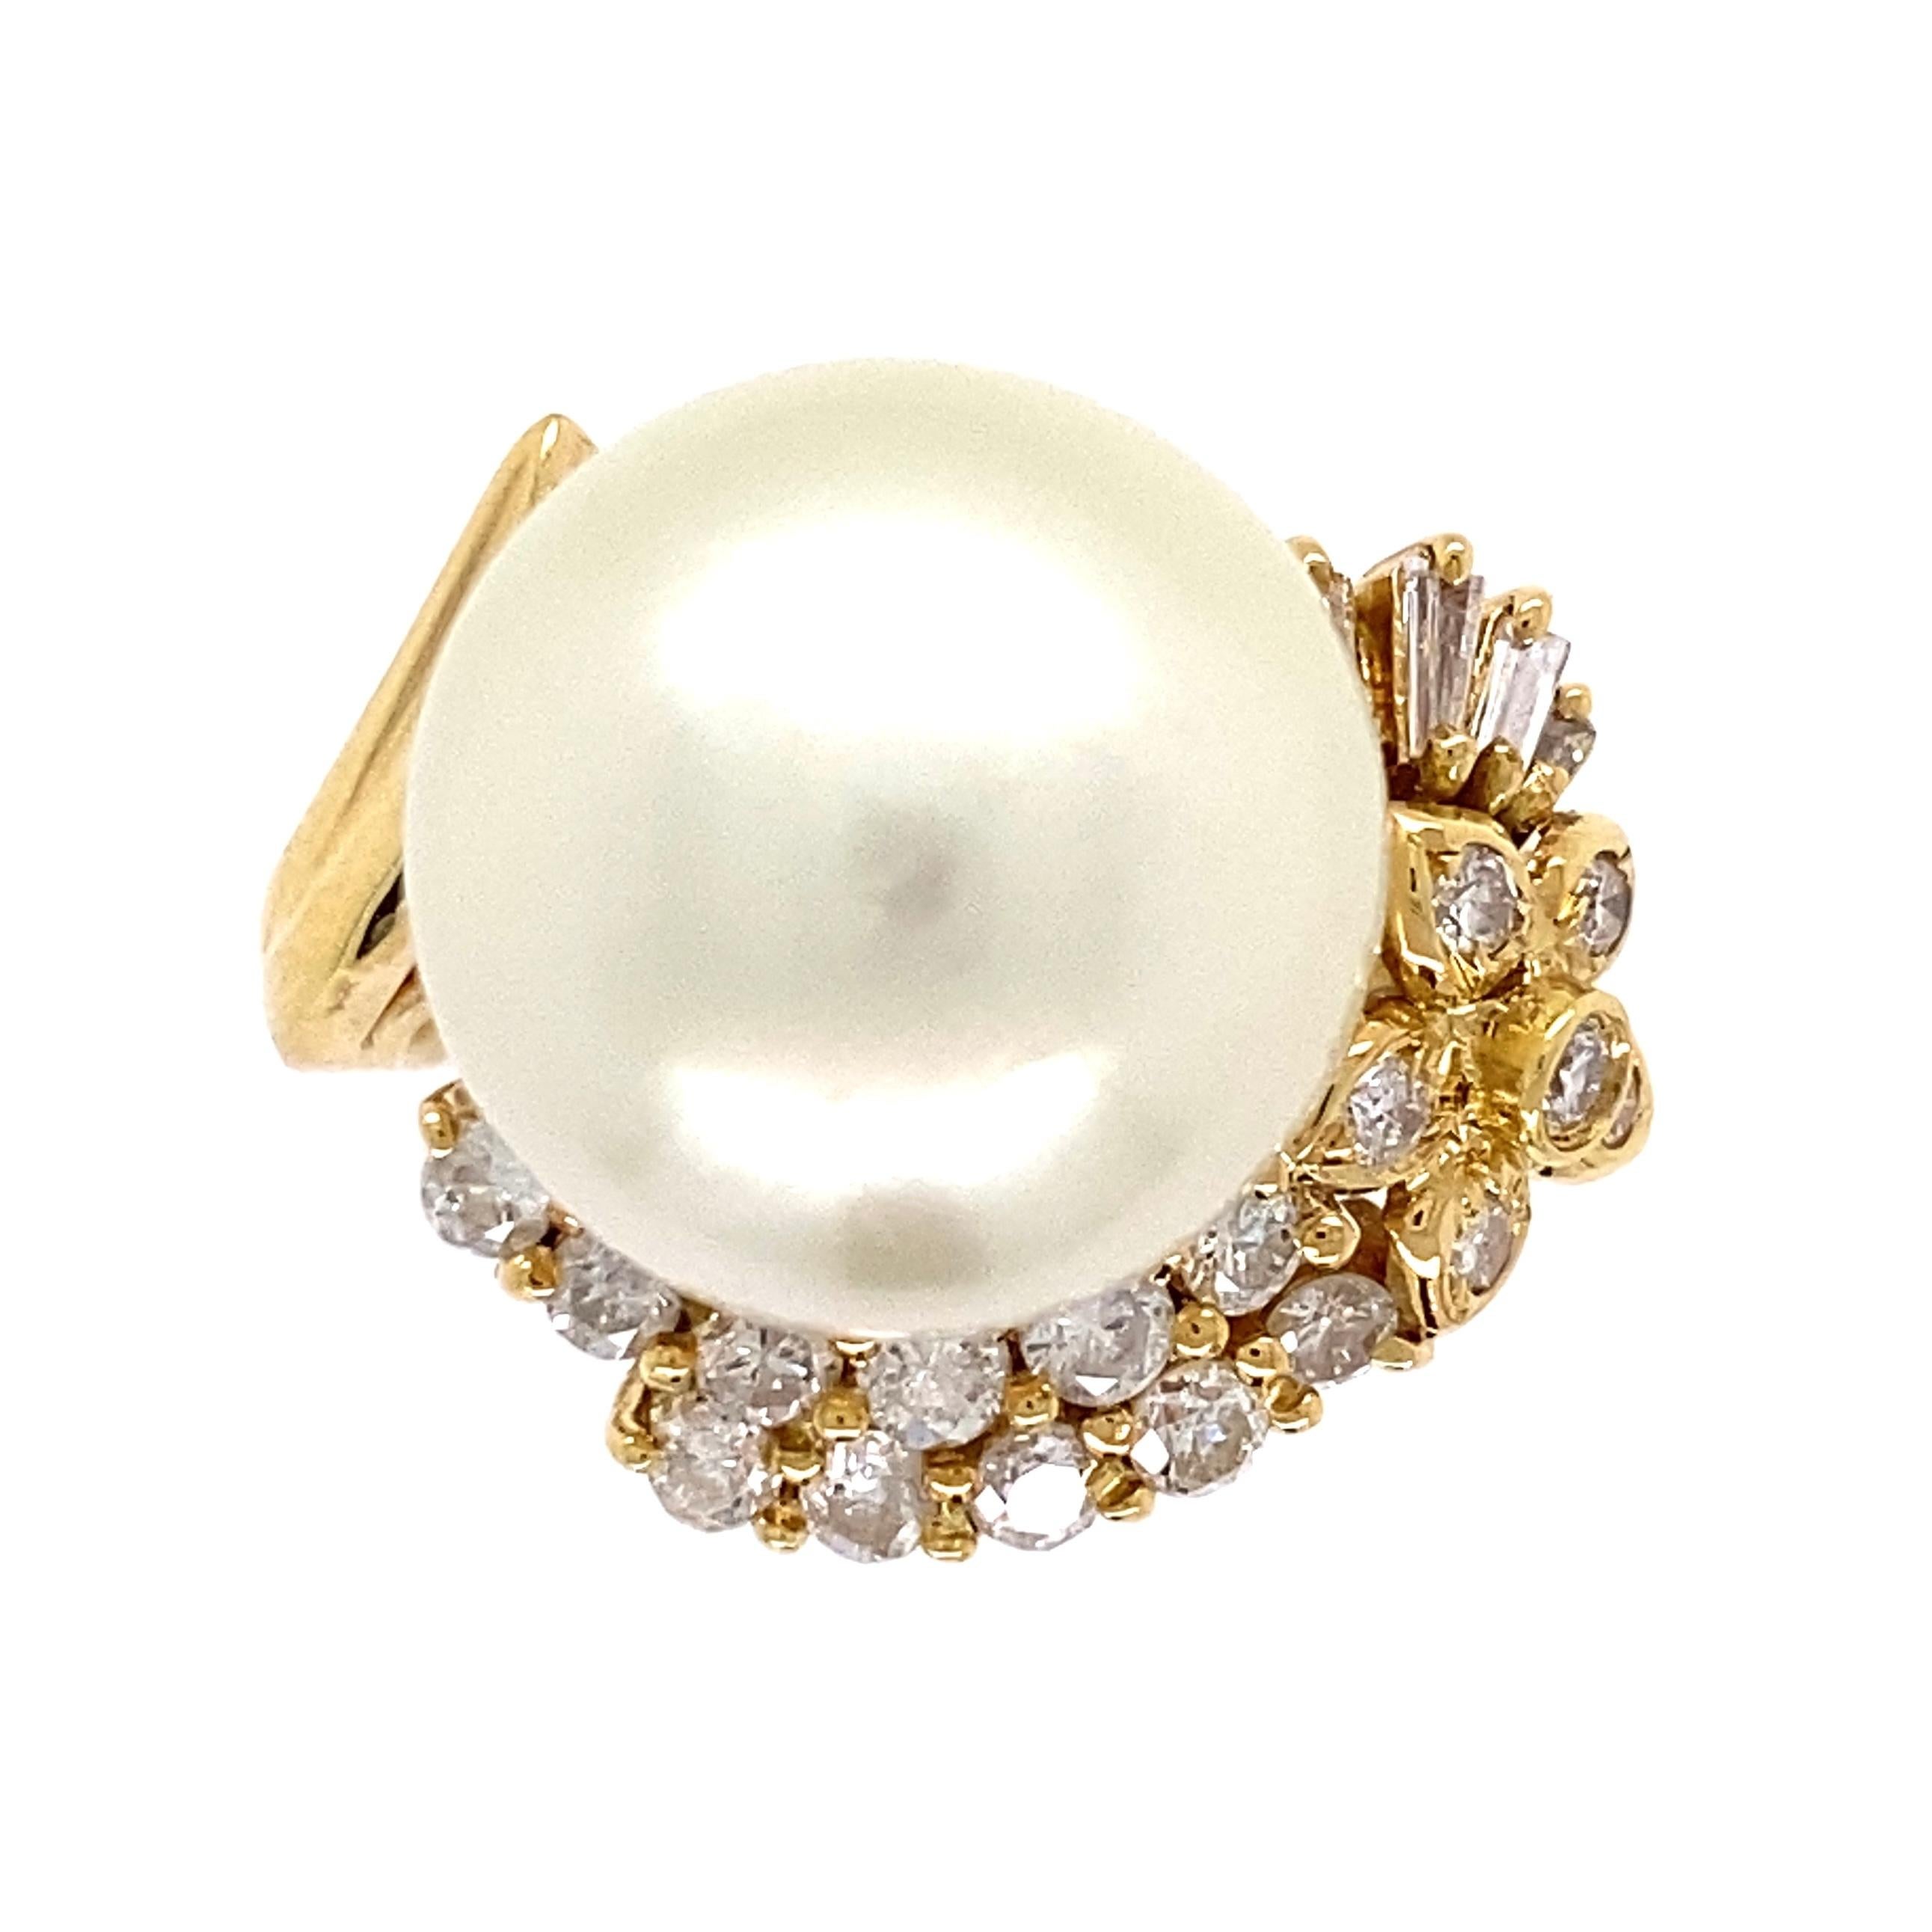 Simply Beautiful! Finely detailed South Sea Pearl and Diamond Cocktail Ring. Center securely nestled with a Hand set 13.7mm South Sea Pearl, enhanced with Hand set Diamonds, weighing approx. 0.70 total carat weight. Dimensions 1.23” l x 0.84” w x